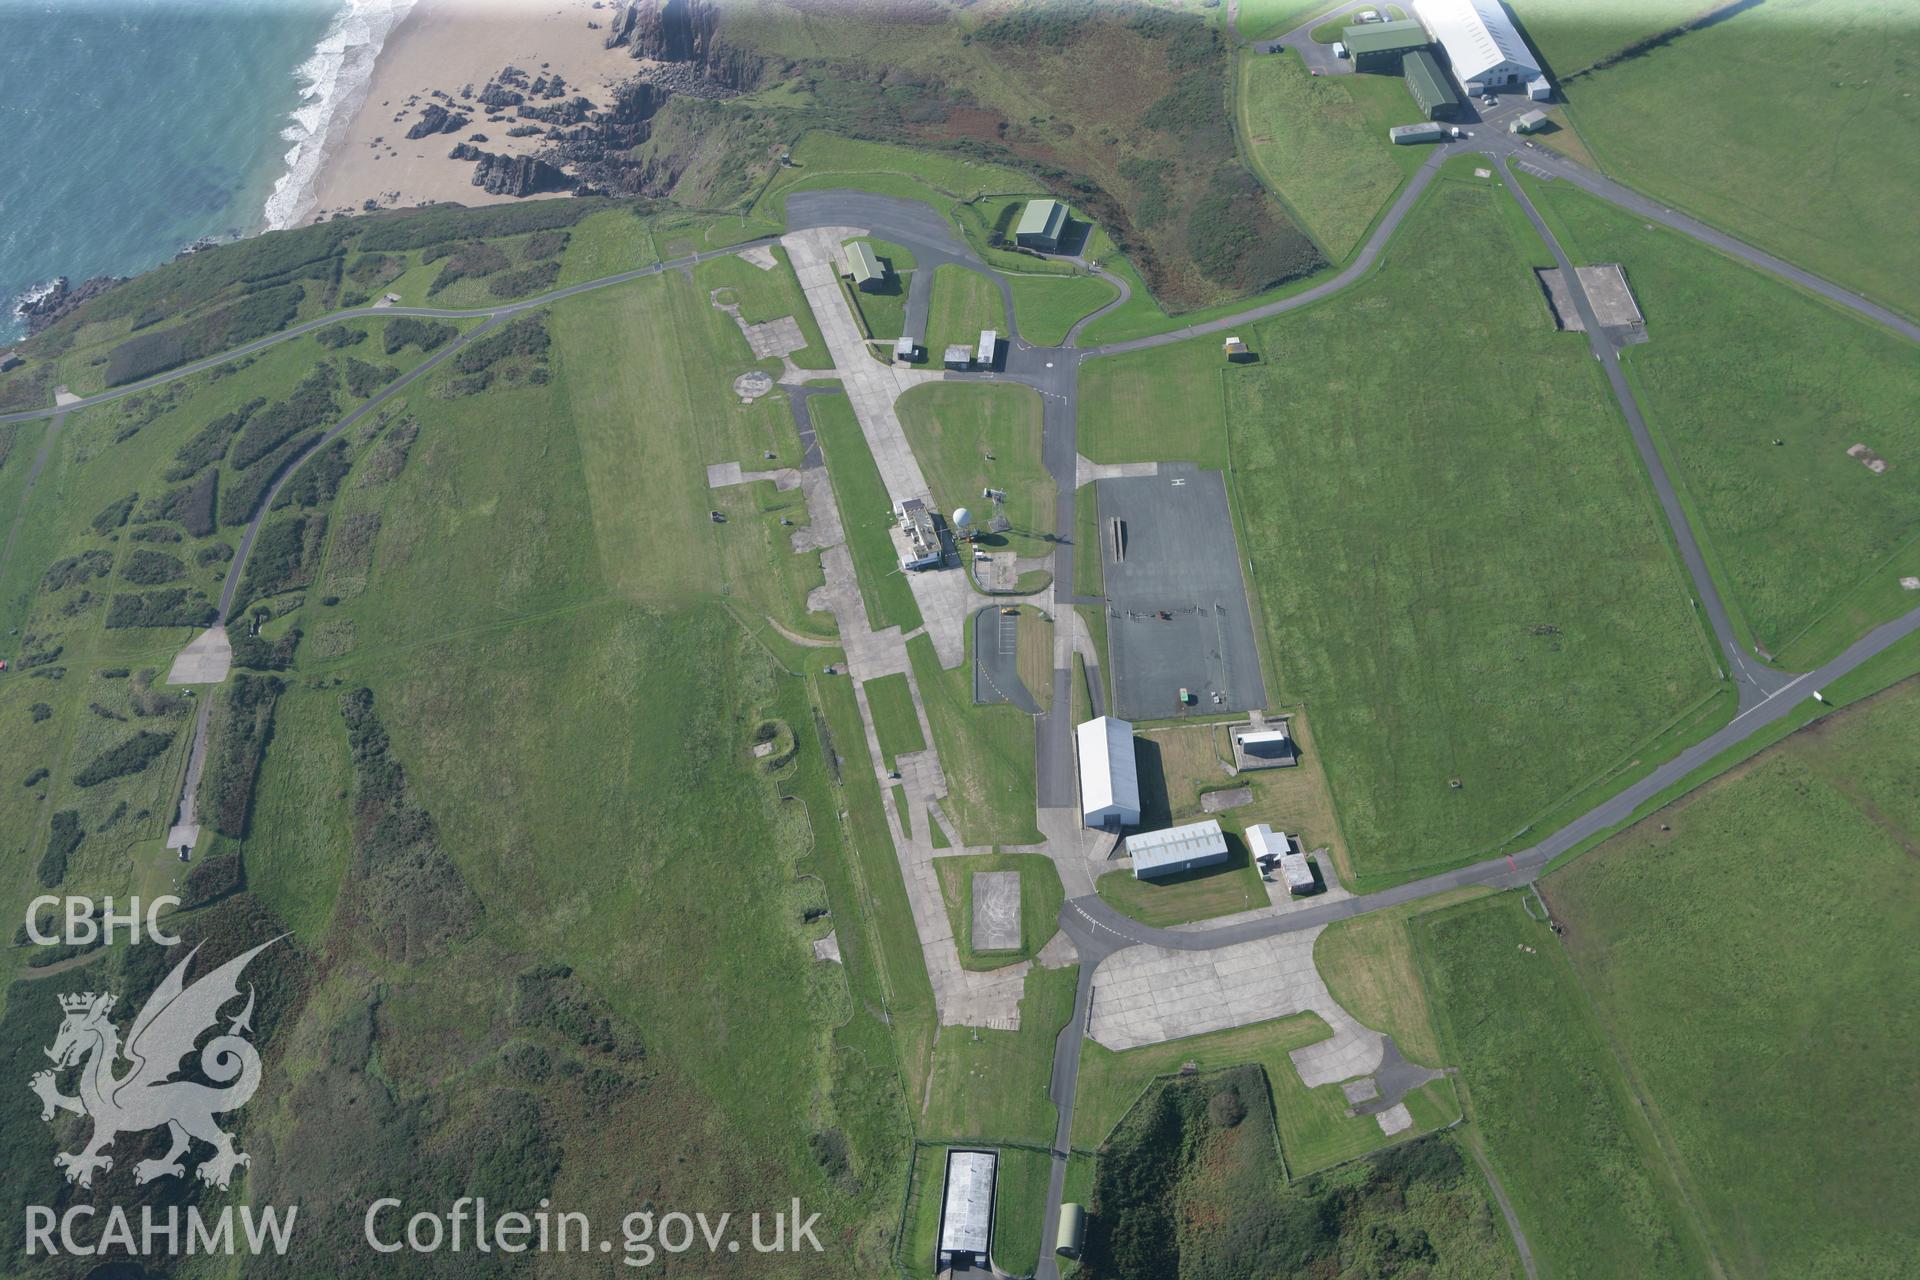 RCAHMW colour oblique photograph of Manobier Airfield. Taken by Toby Driver and Oliver Davies on 28/09/2011.